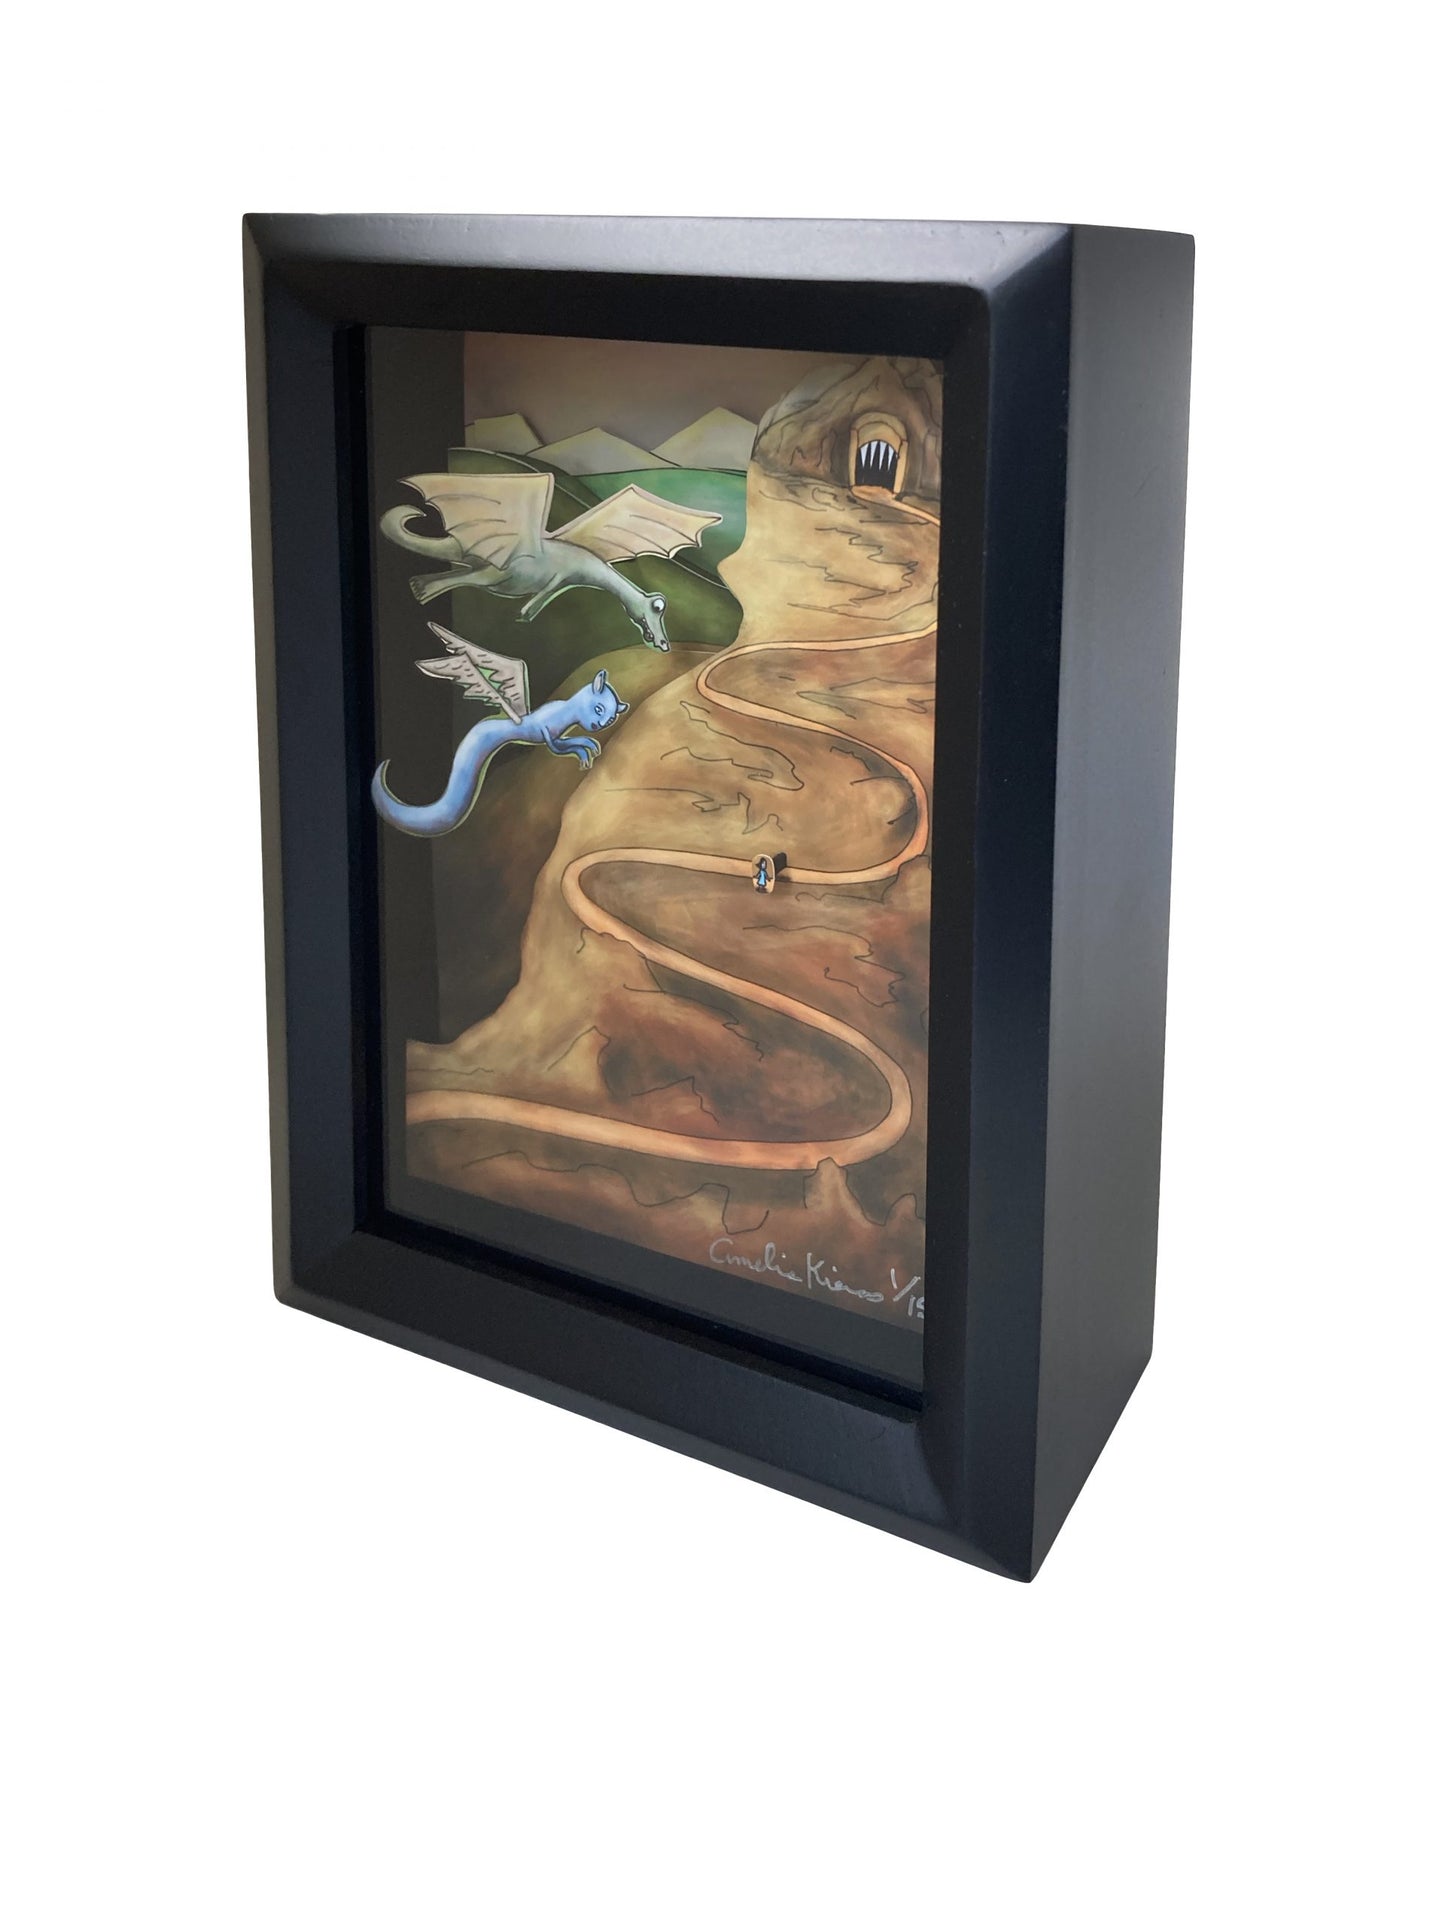 Another Journey - Limited Edition Shadow Box Wall Art